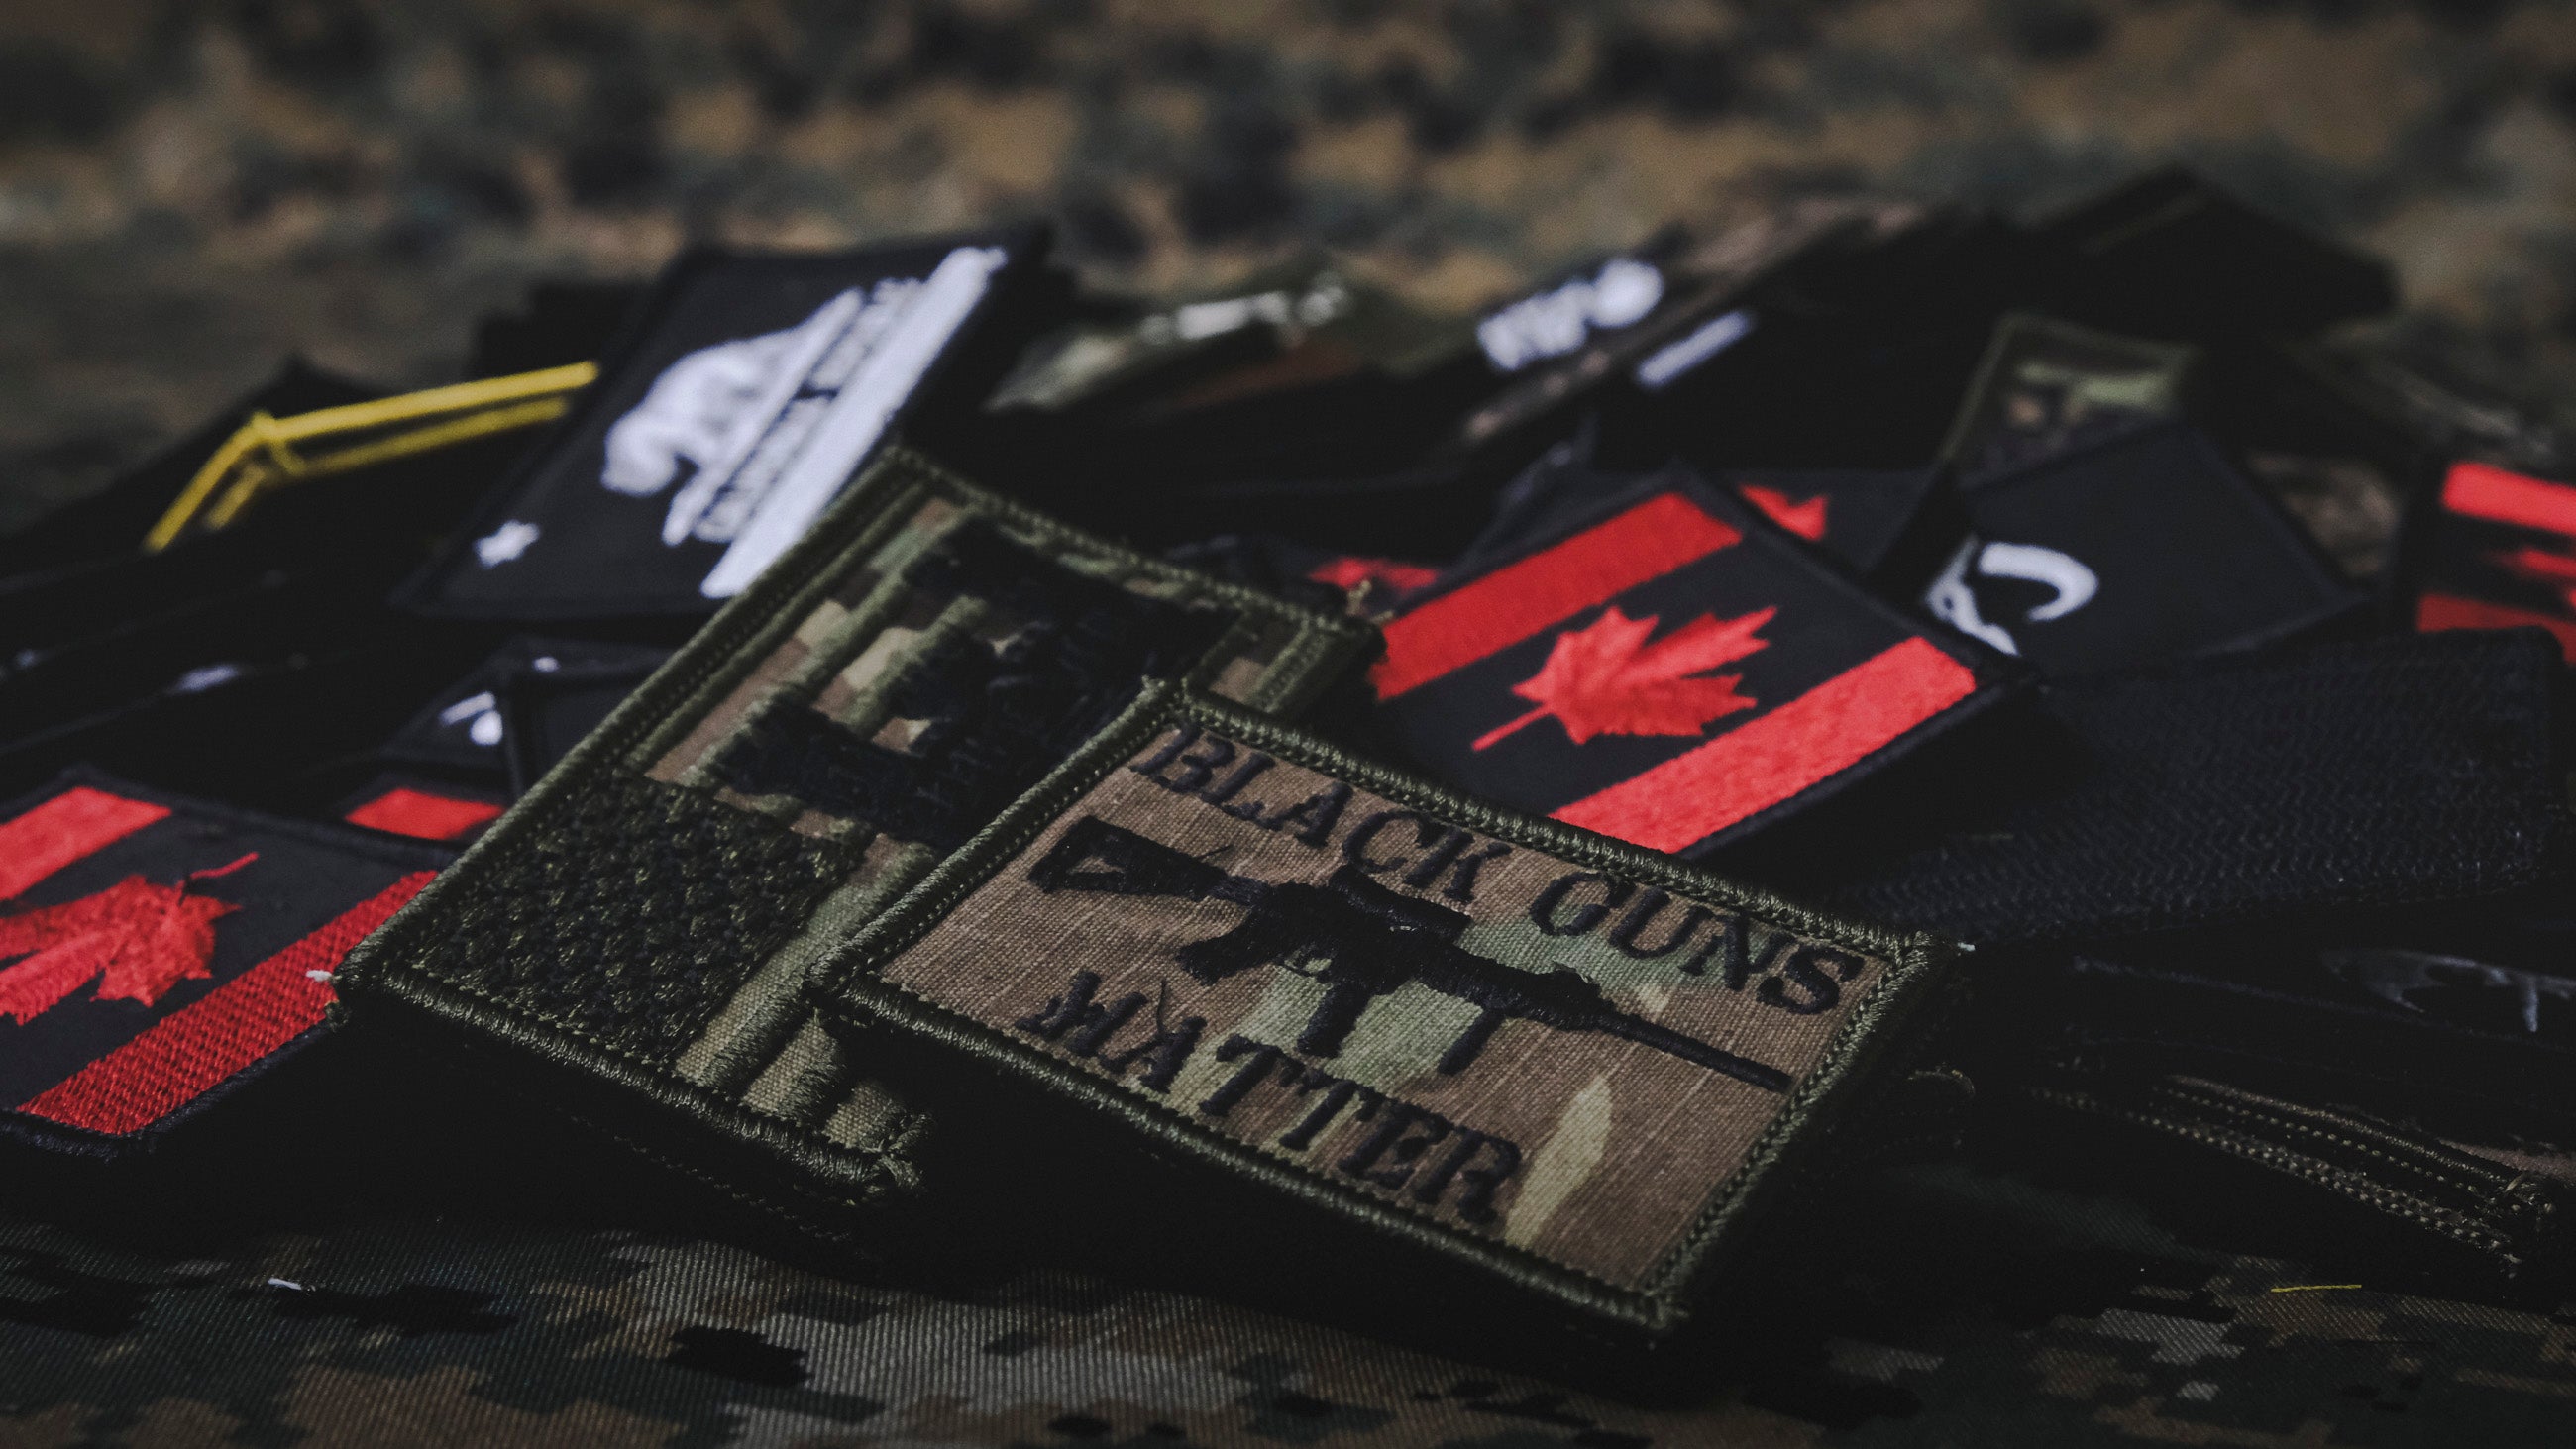 Organize and display your morale patches